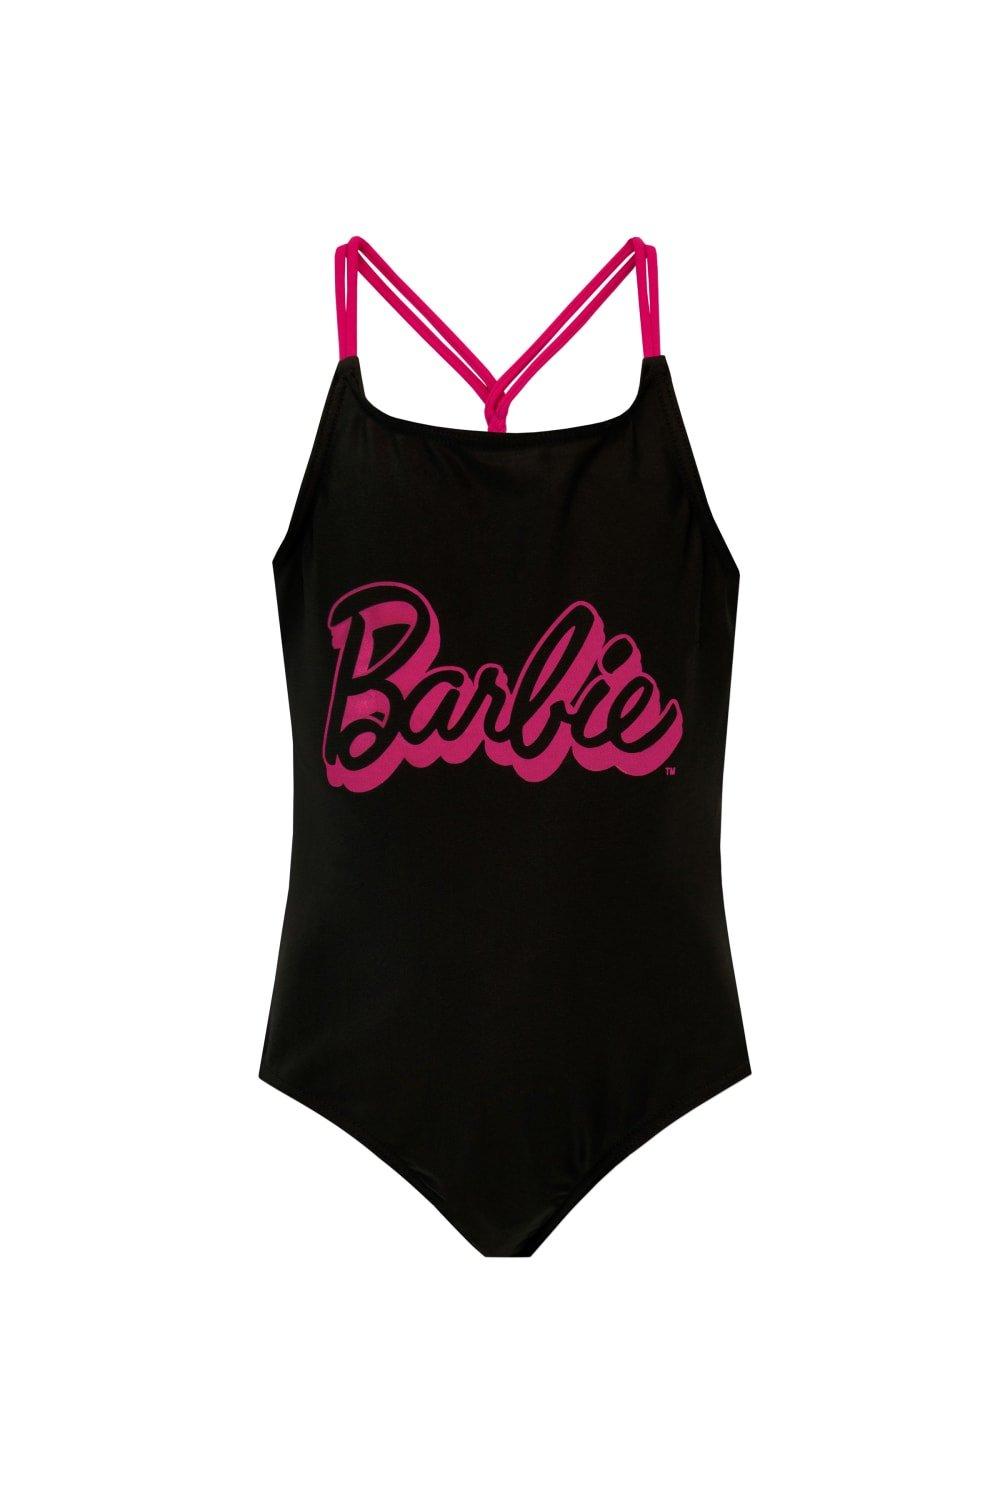 Swimsuit One Piece Swimming Costume